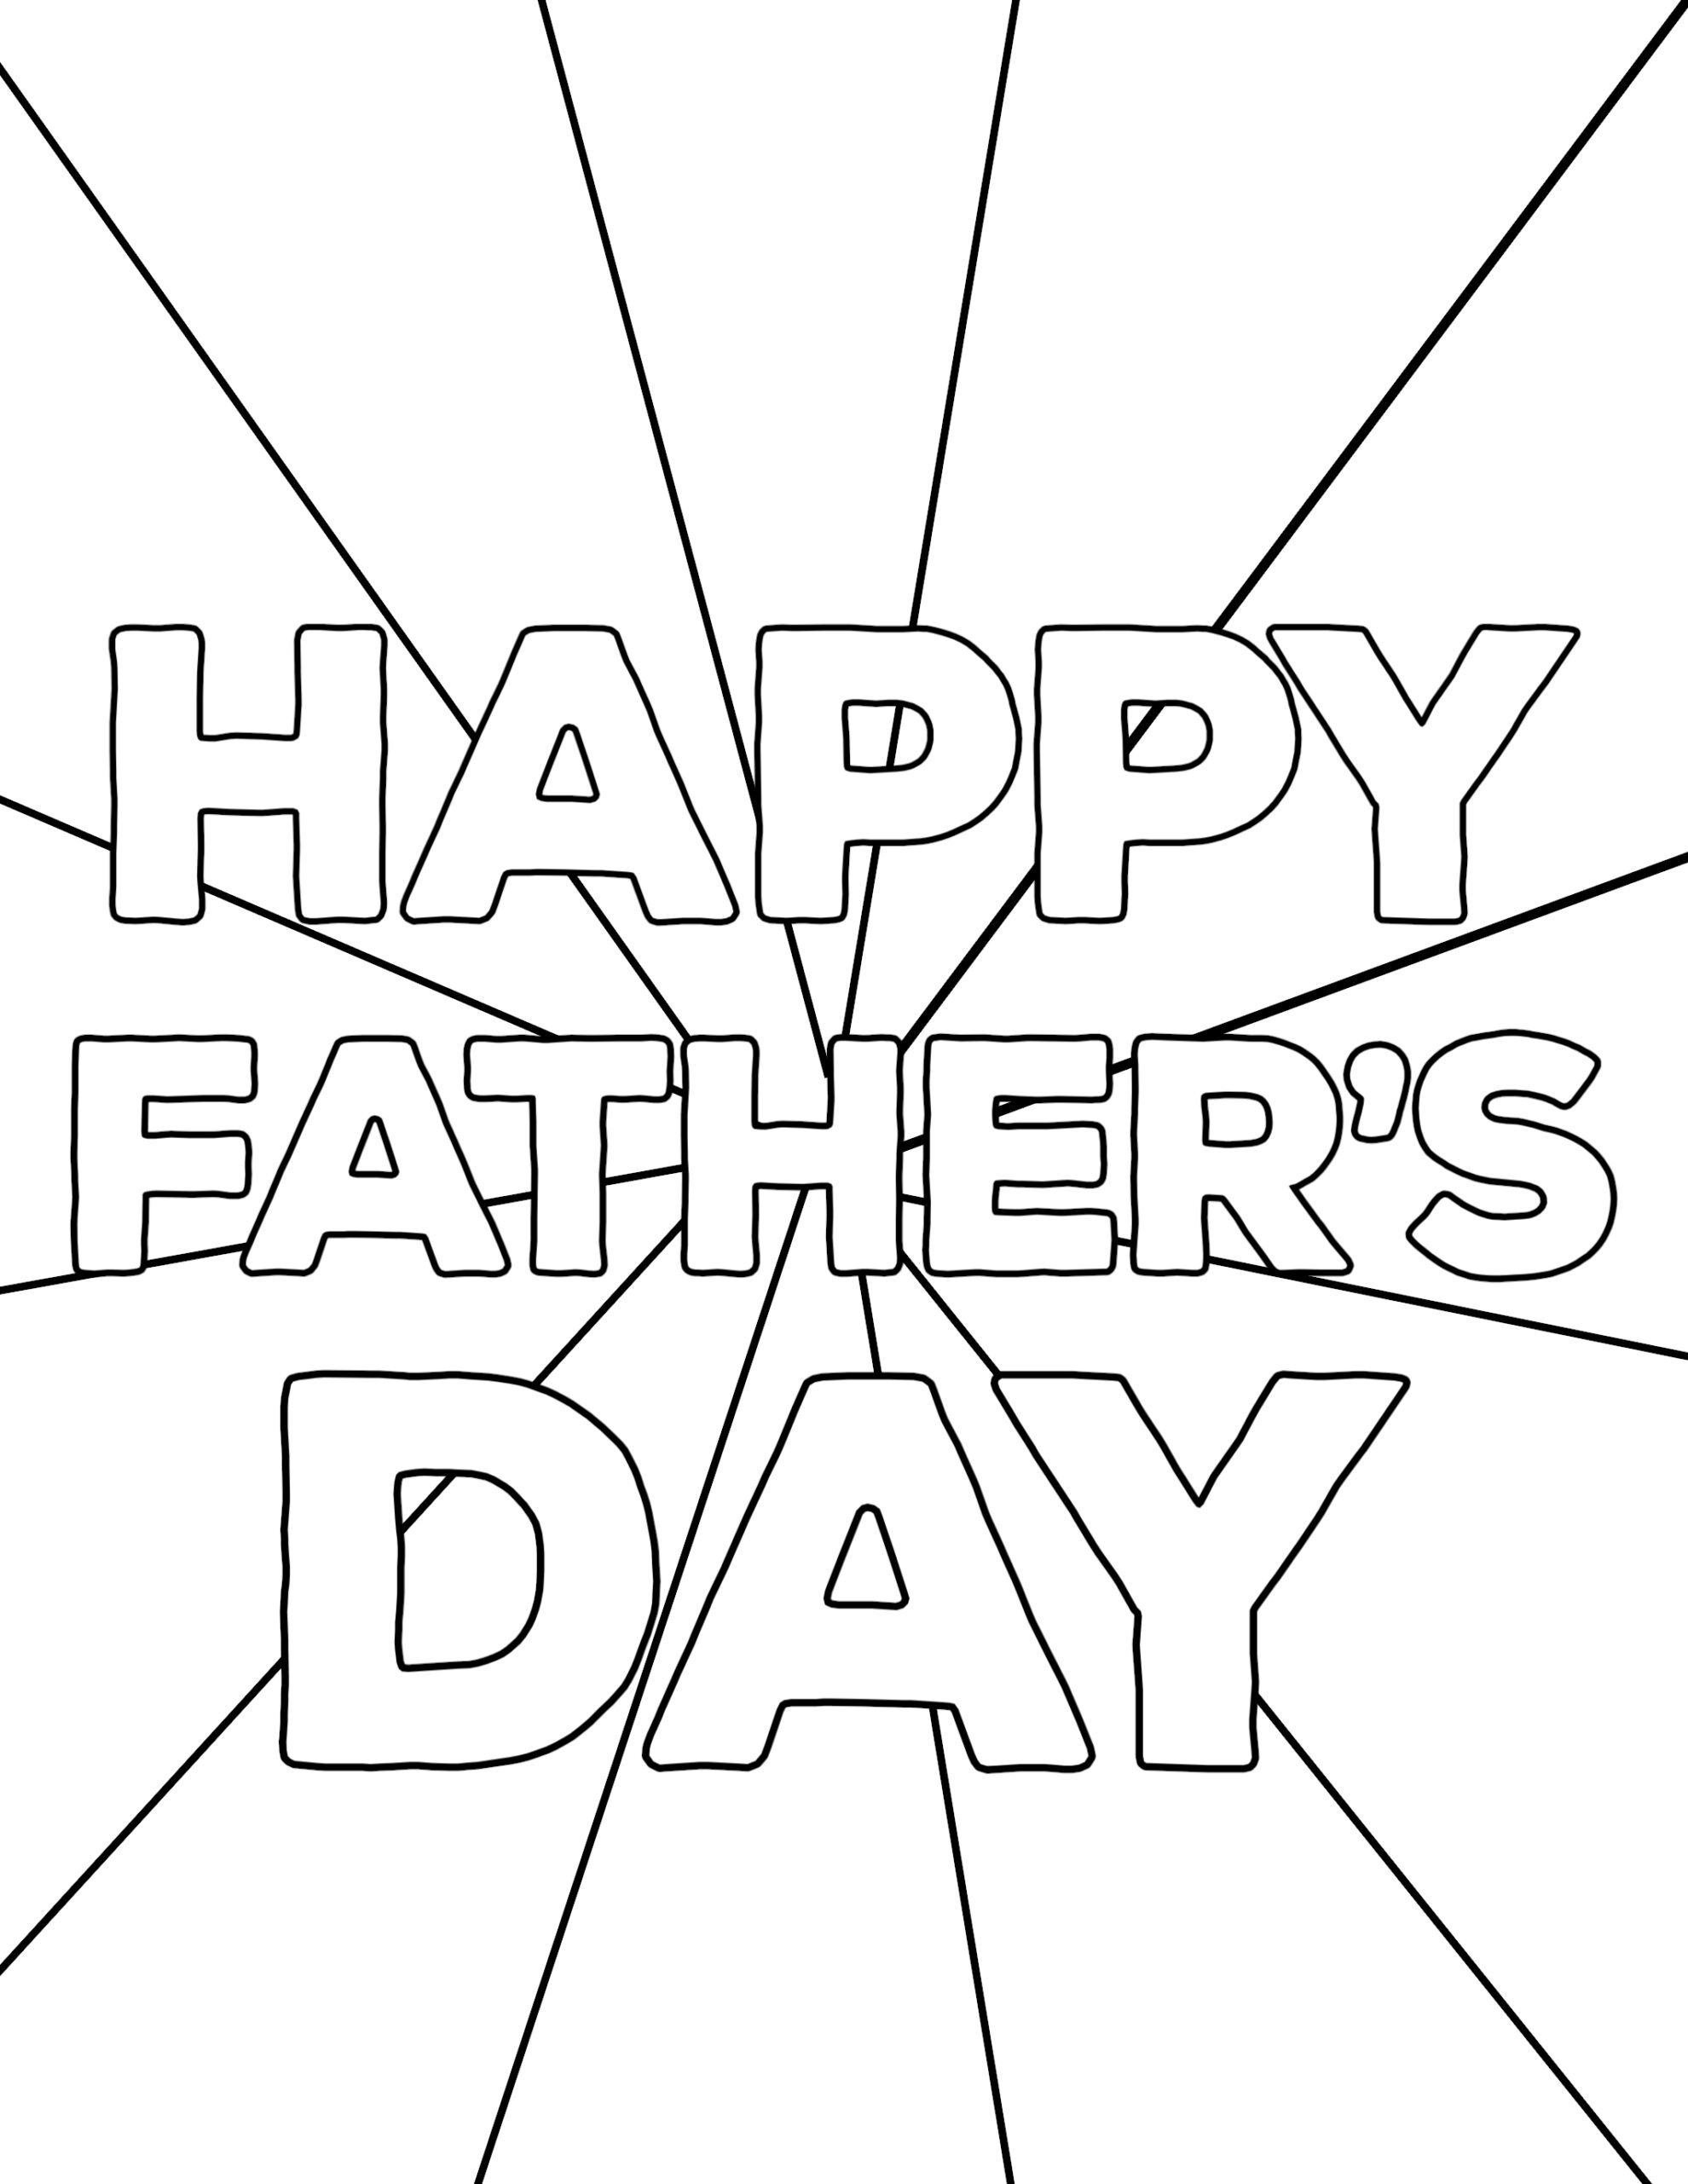 Happy Father's Day Coloring Pages Free Printables Paper Trail Design